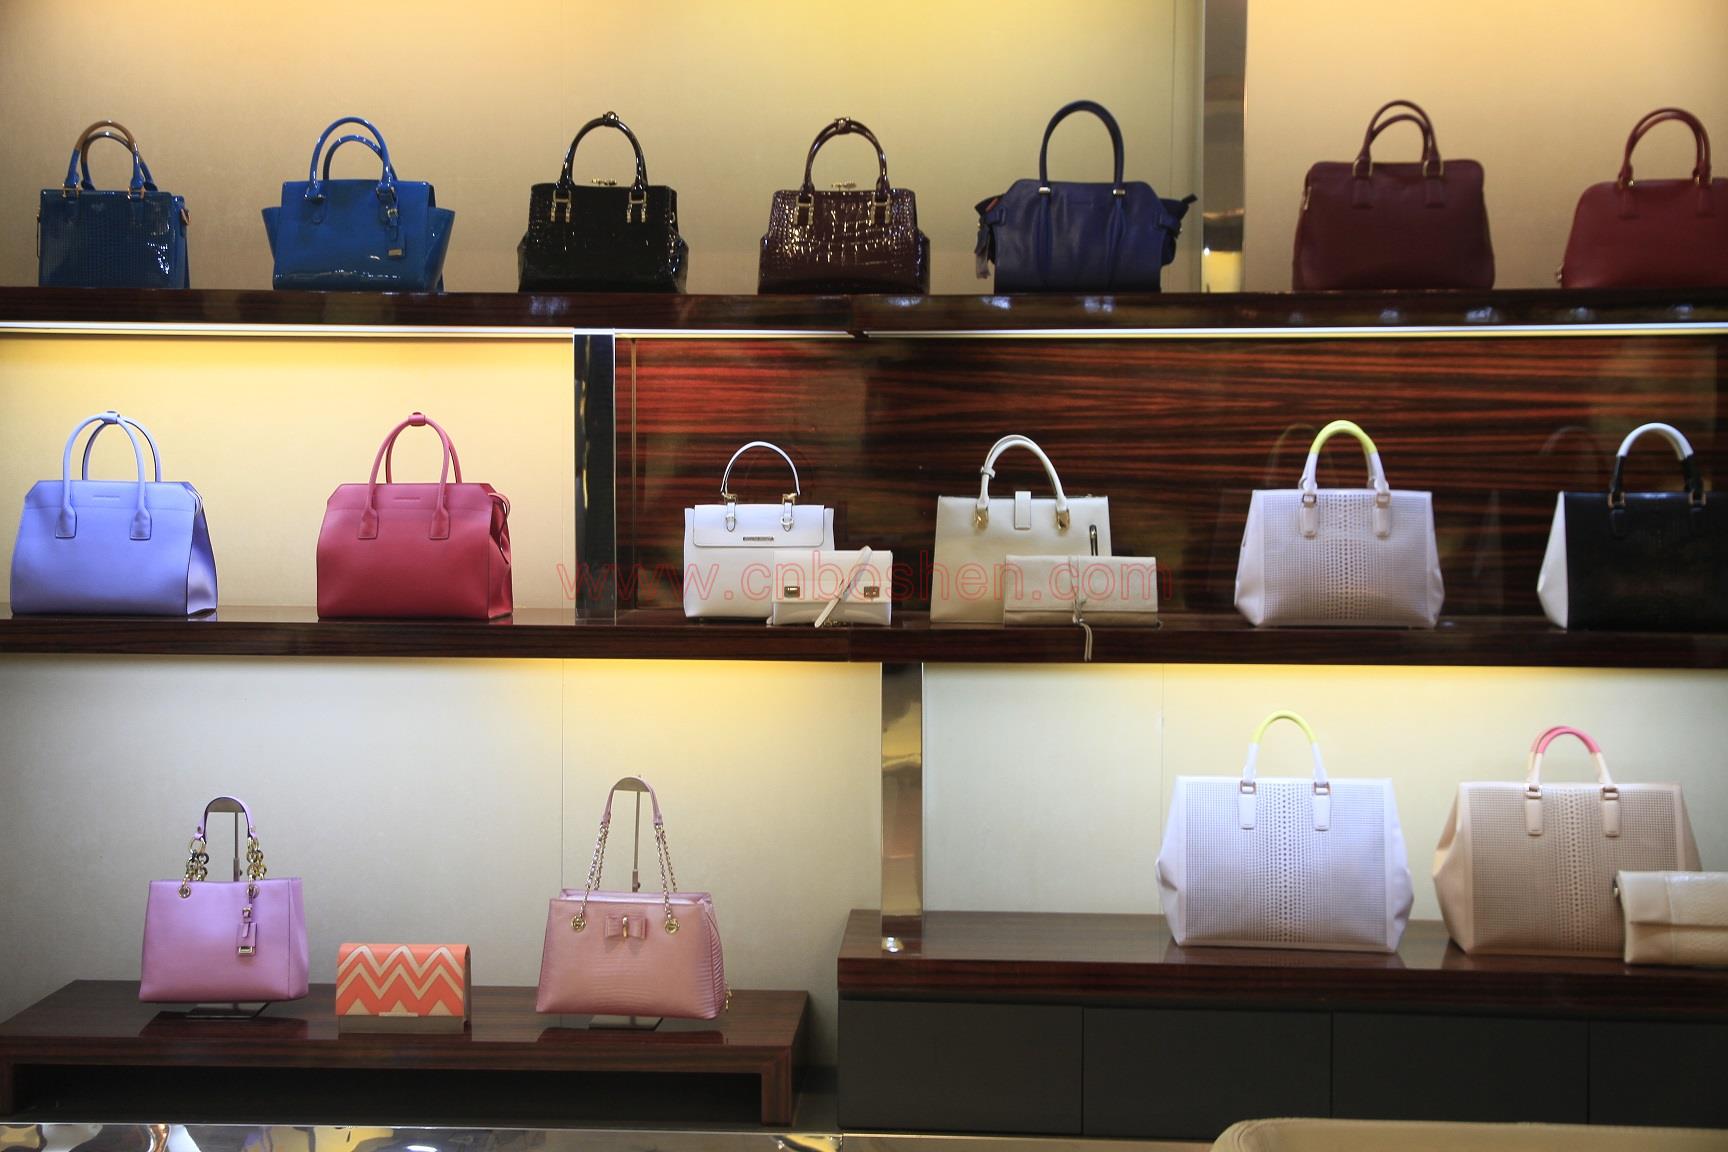 Guangzhou Leather Bag Manufacturer teaches you a few good ways to care leather